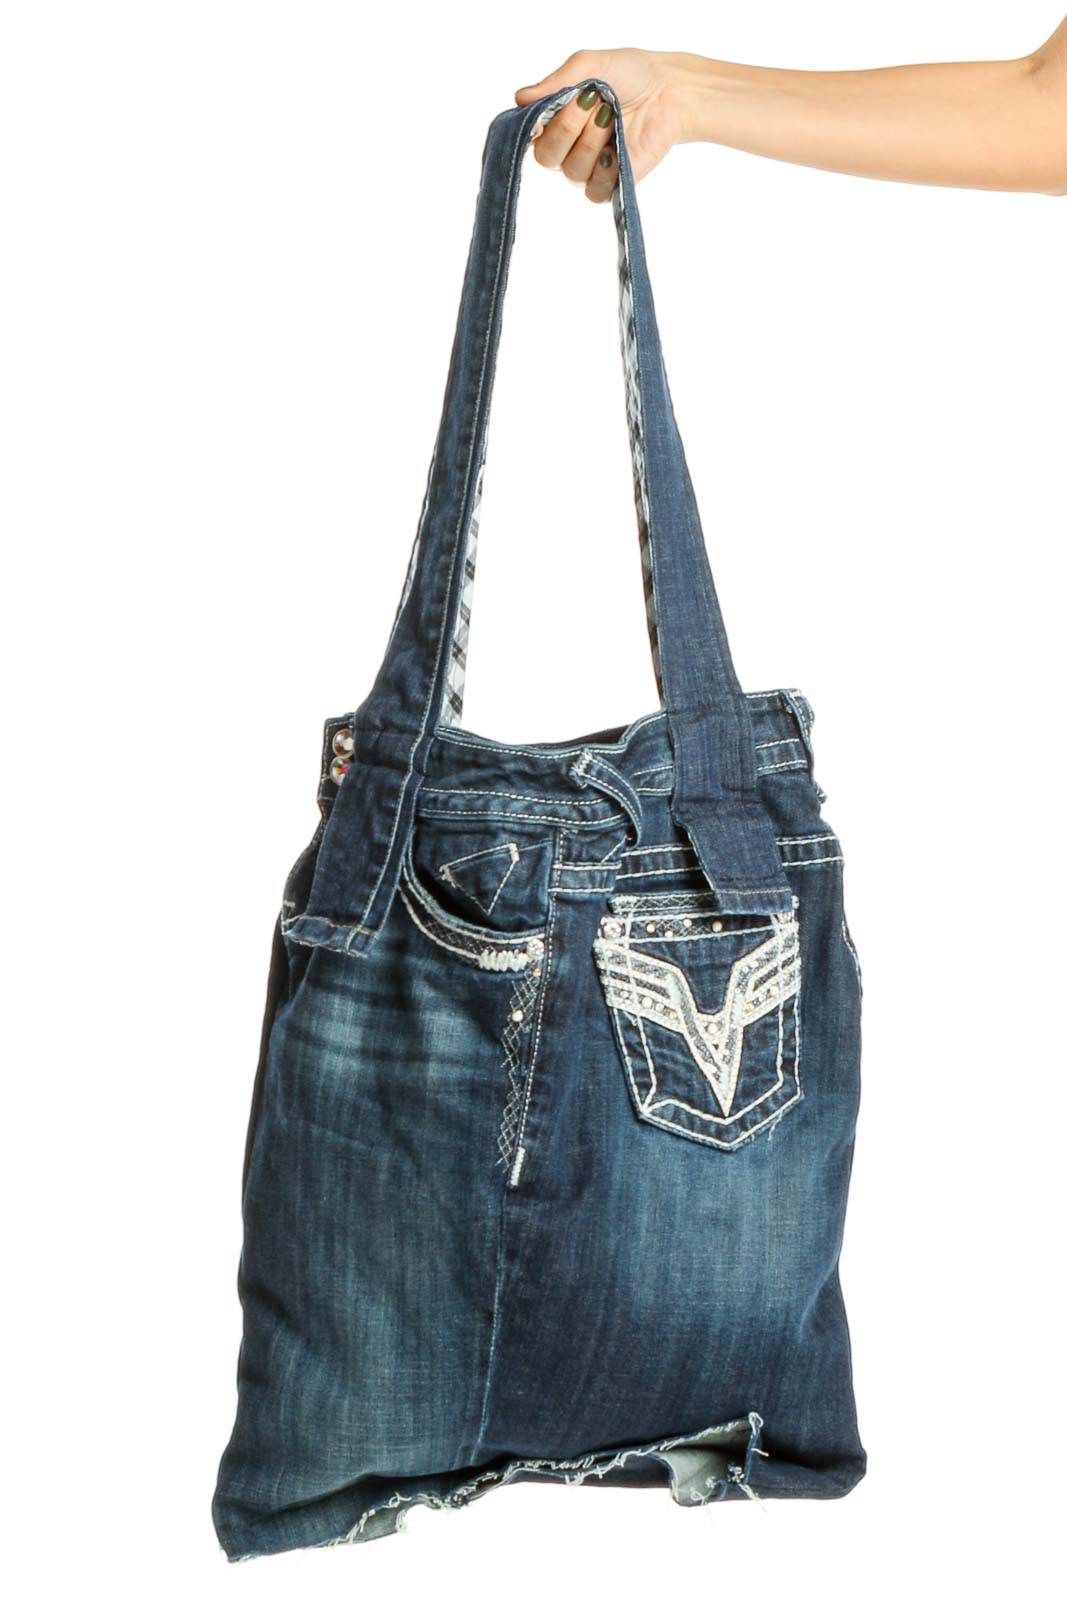 Reworked: Blue Denim Tote Bag From Donated Denim Front